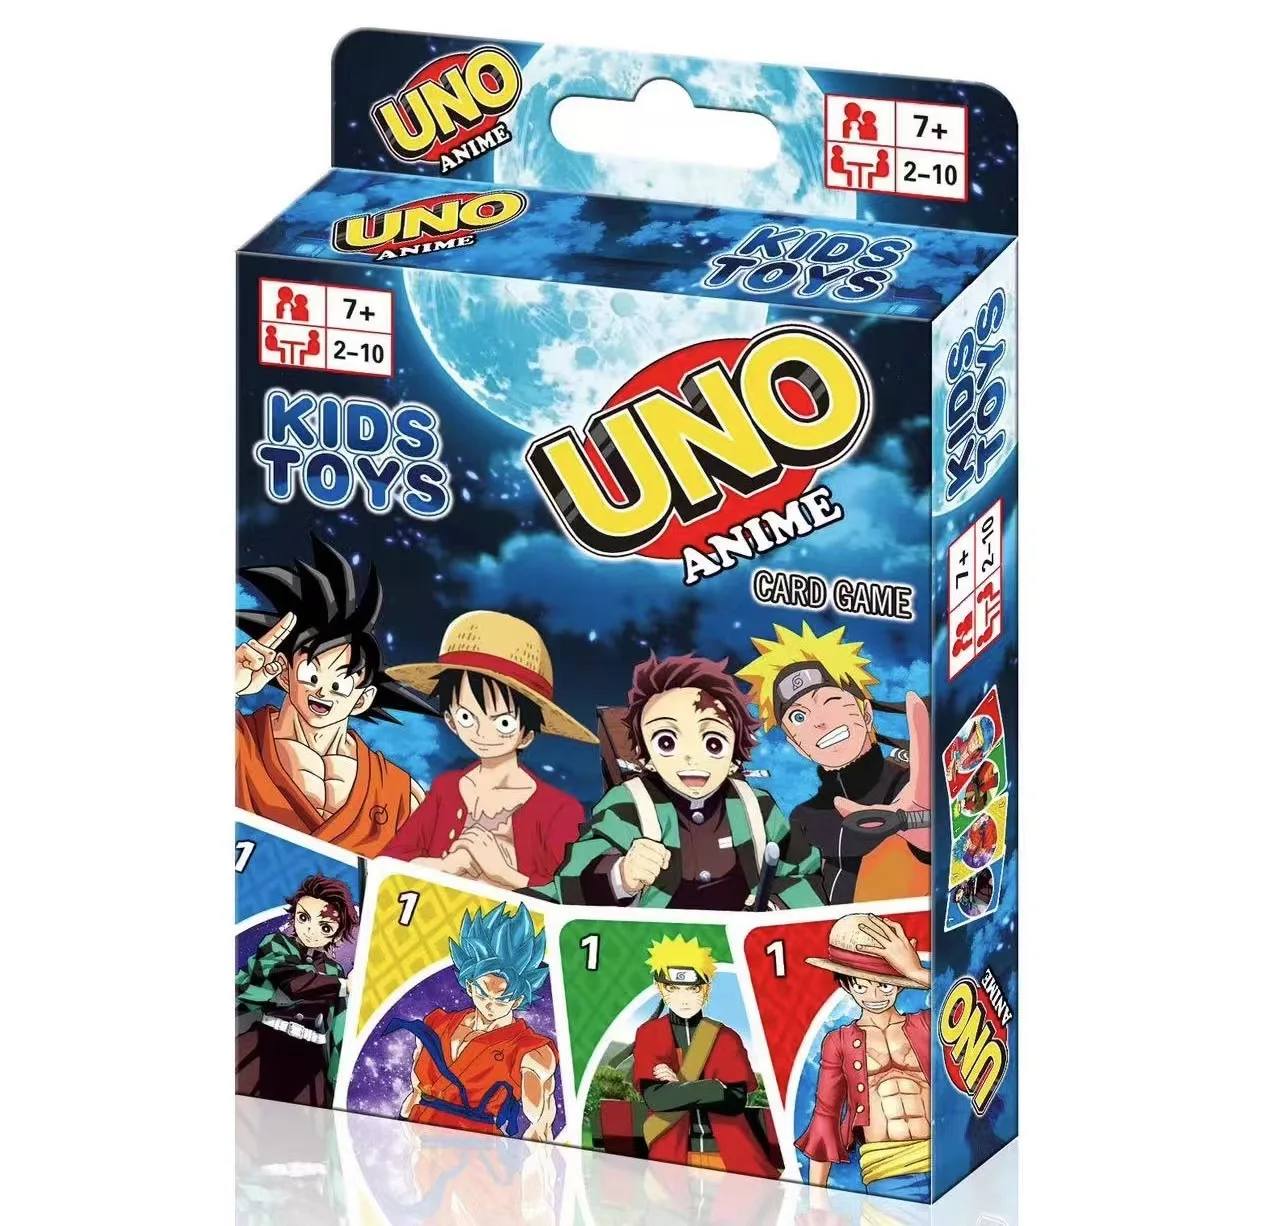 UNO FLIP! Board Games Playing Cards UNO Junior Series Totoro Christmas Card  Table Game for Children Adults Kid Birthday Gift Toy - AliExpress